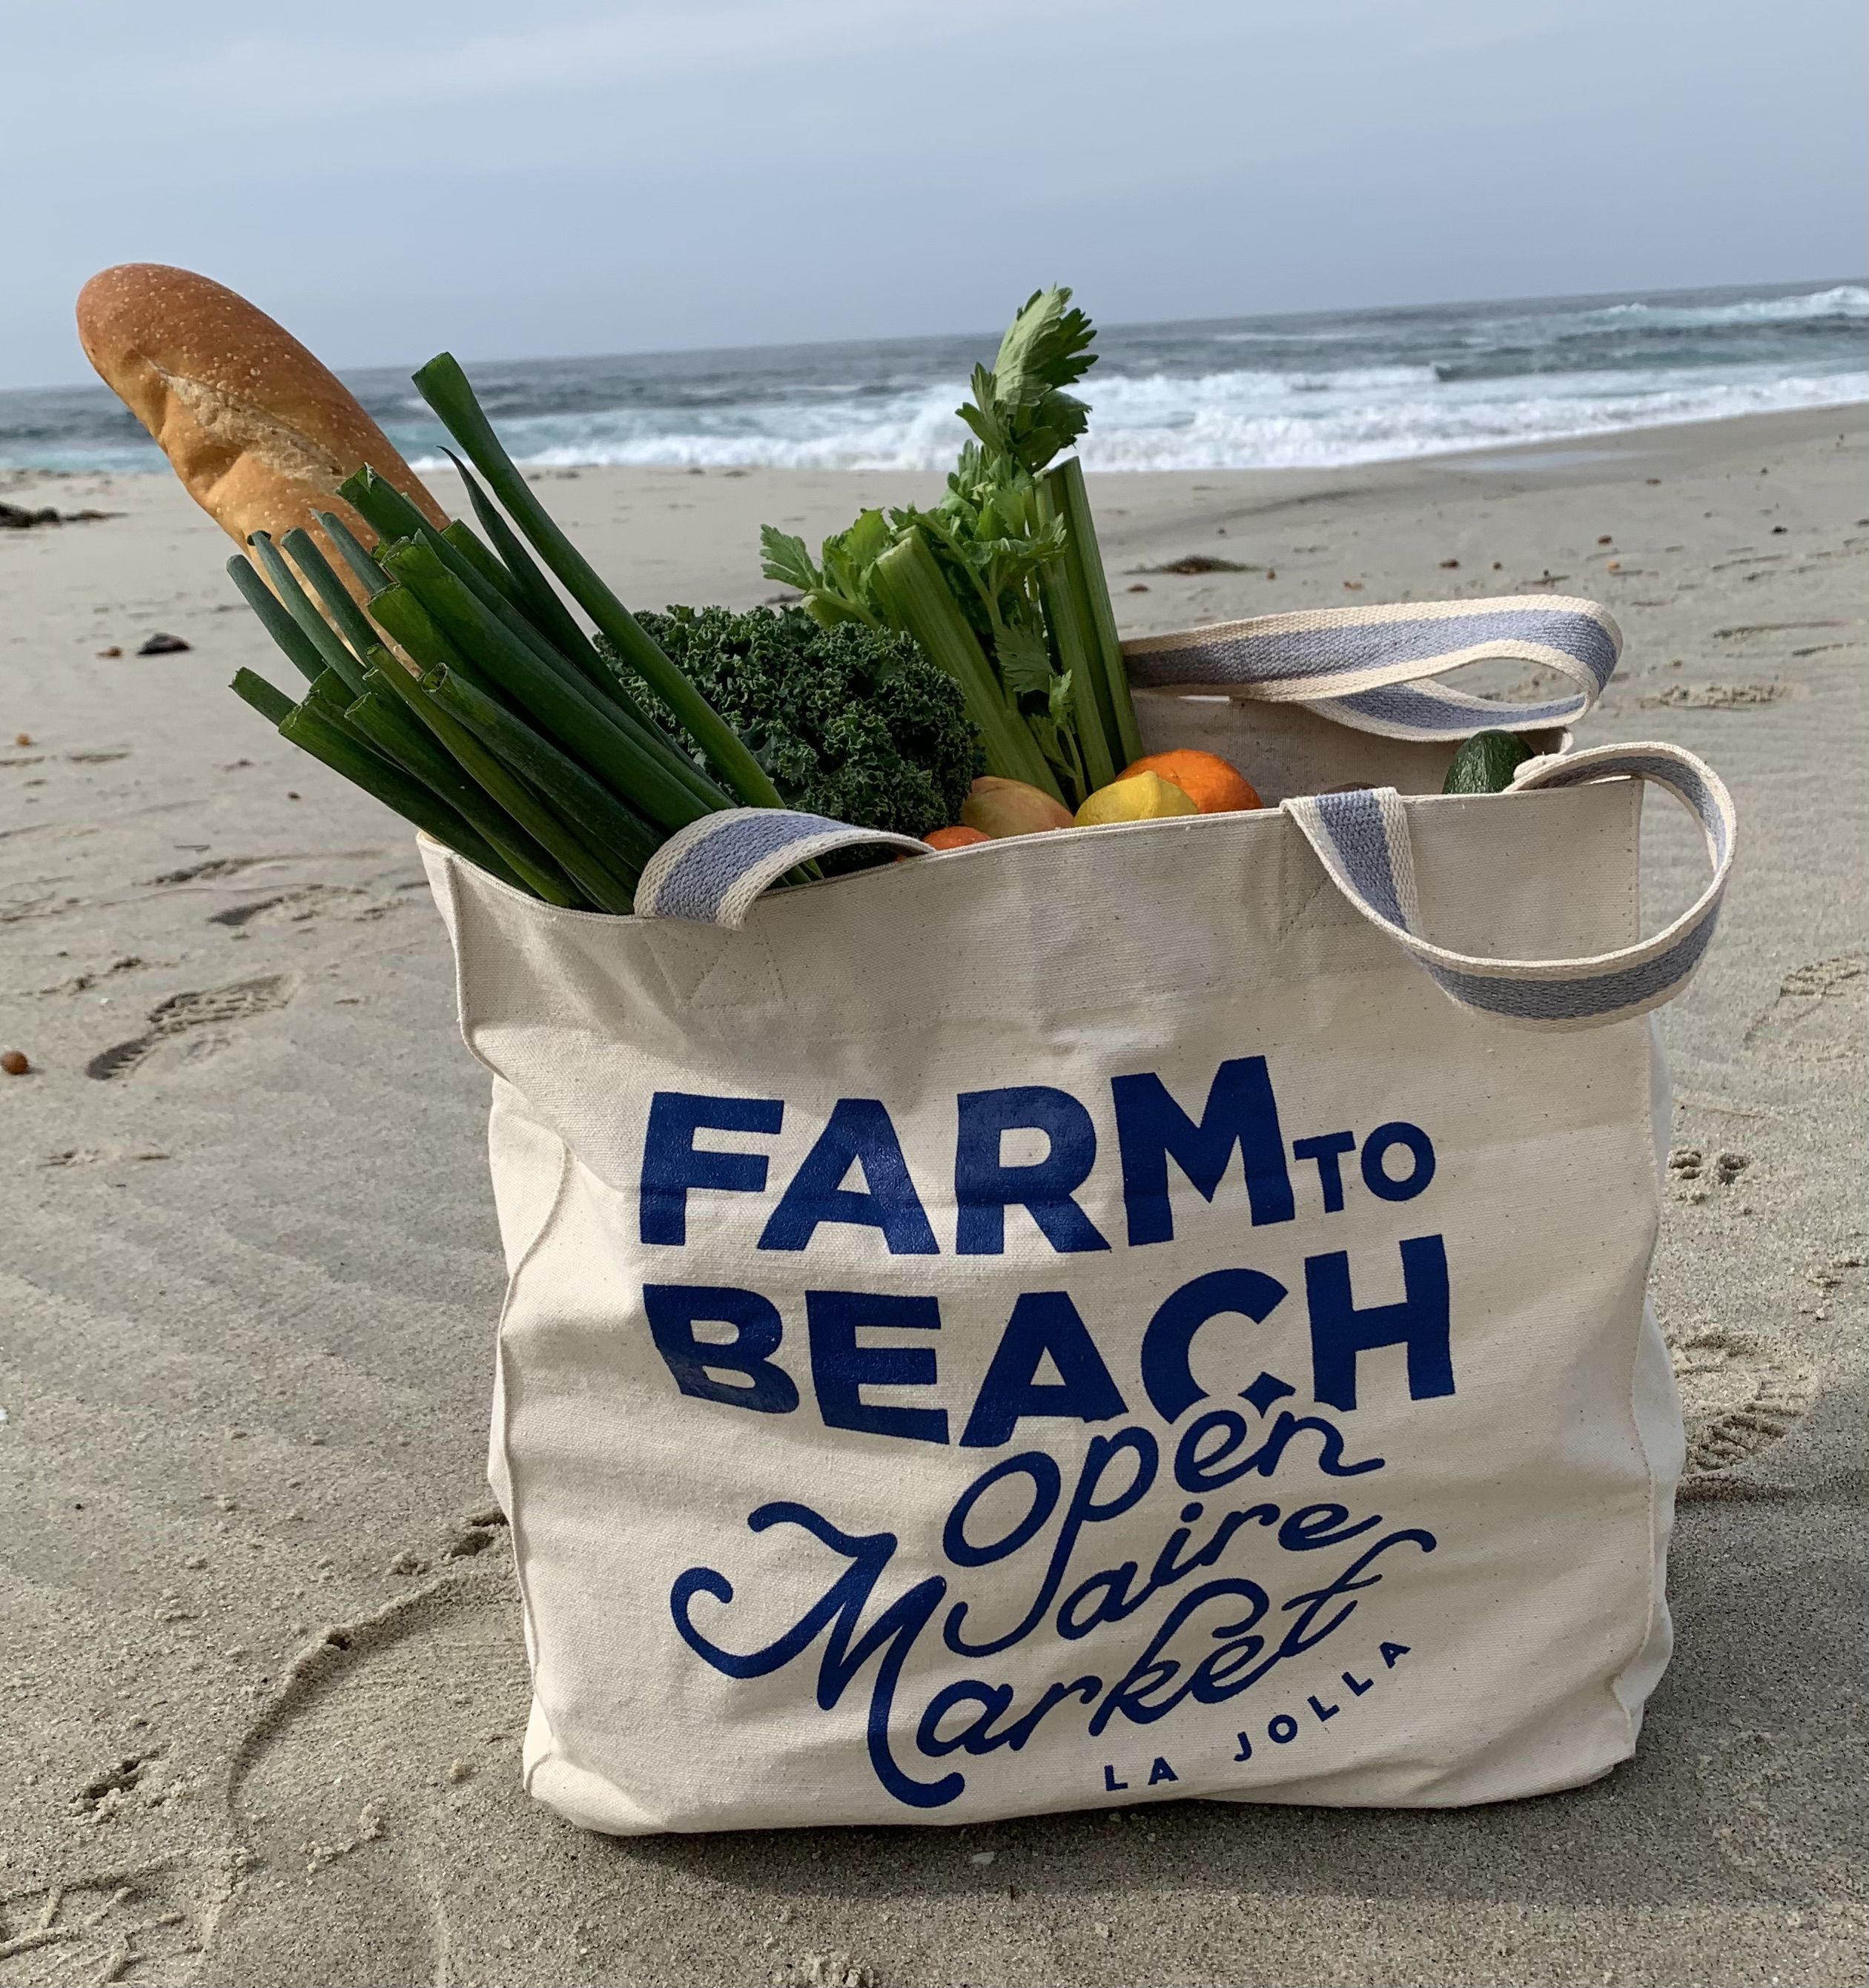 A tote bag that says "Farm to Beach open aire market La Jolla" with fresh produce sits on a sandy beach.